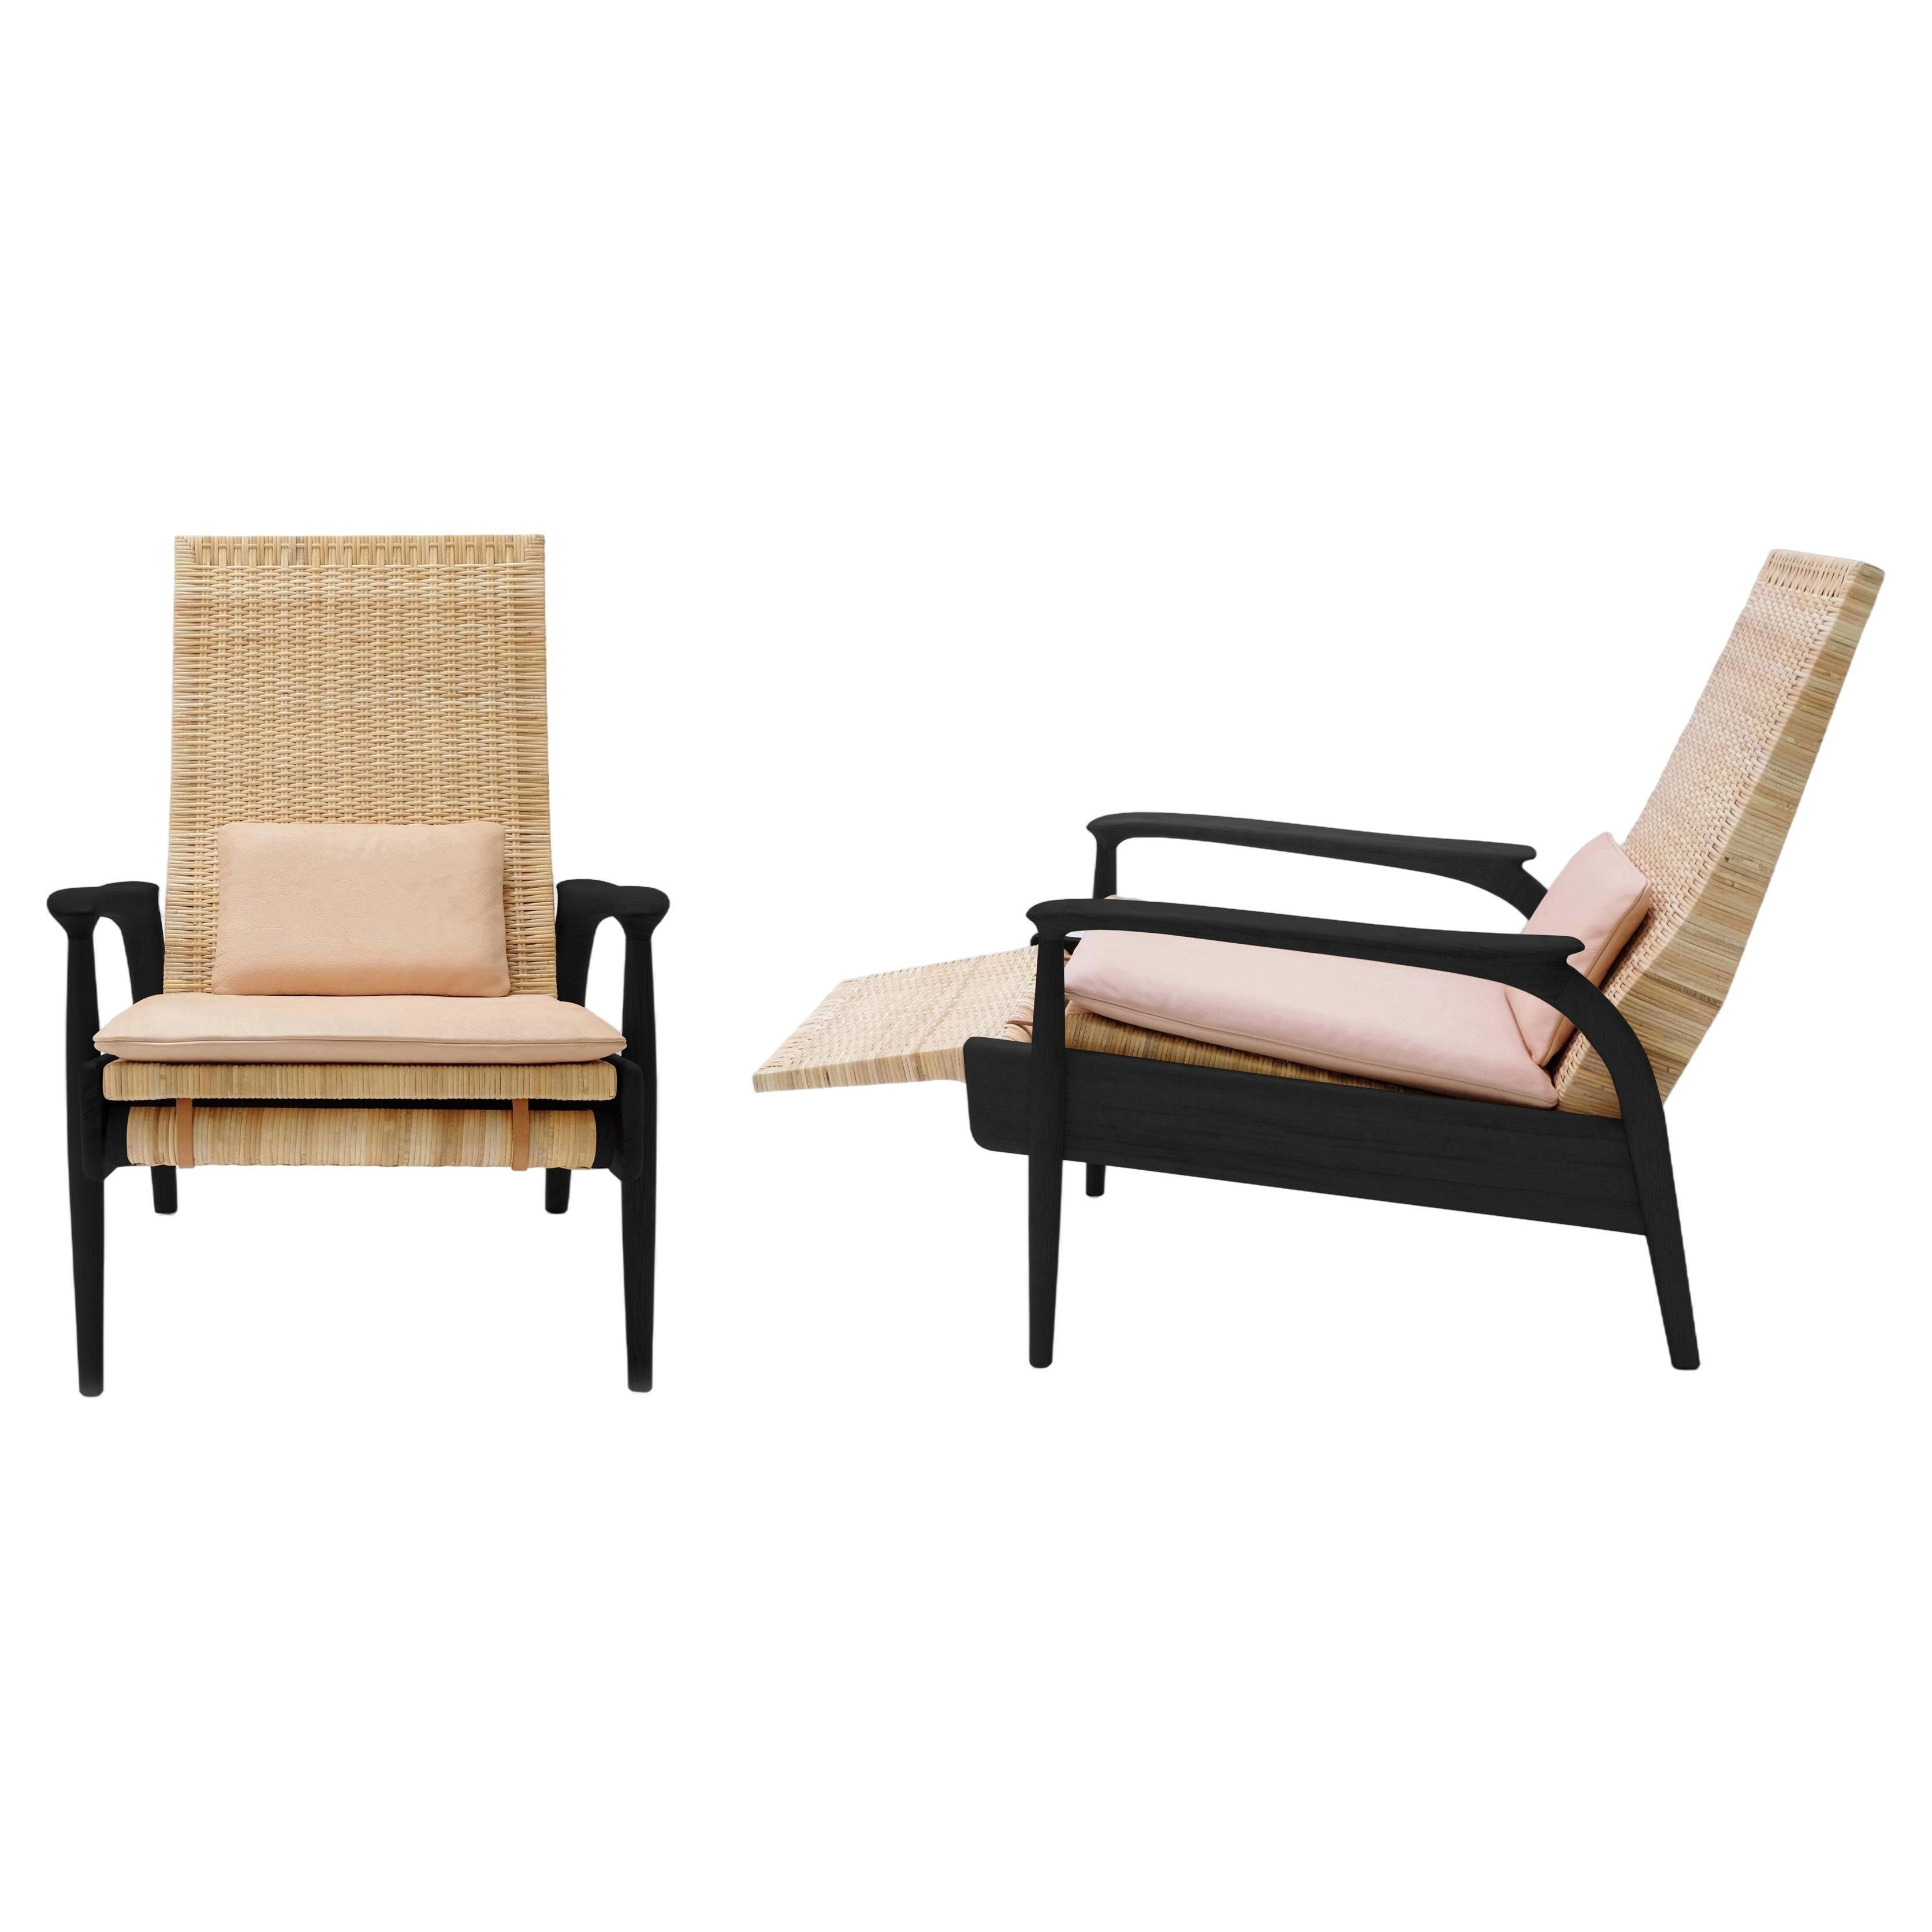 Pair of Eco-Armchairs, Blackened Oak, Handwoven Natural Cane, Leather Cushions For Sale